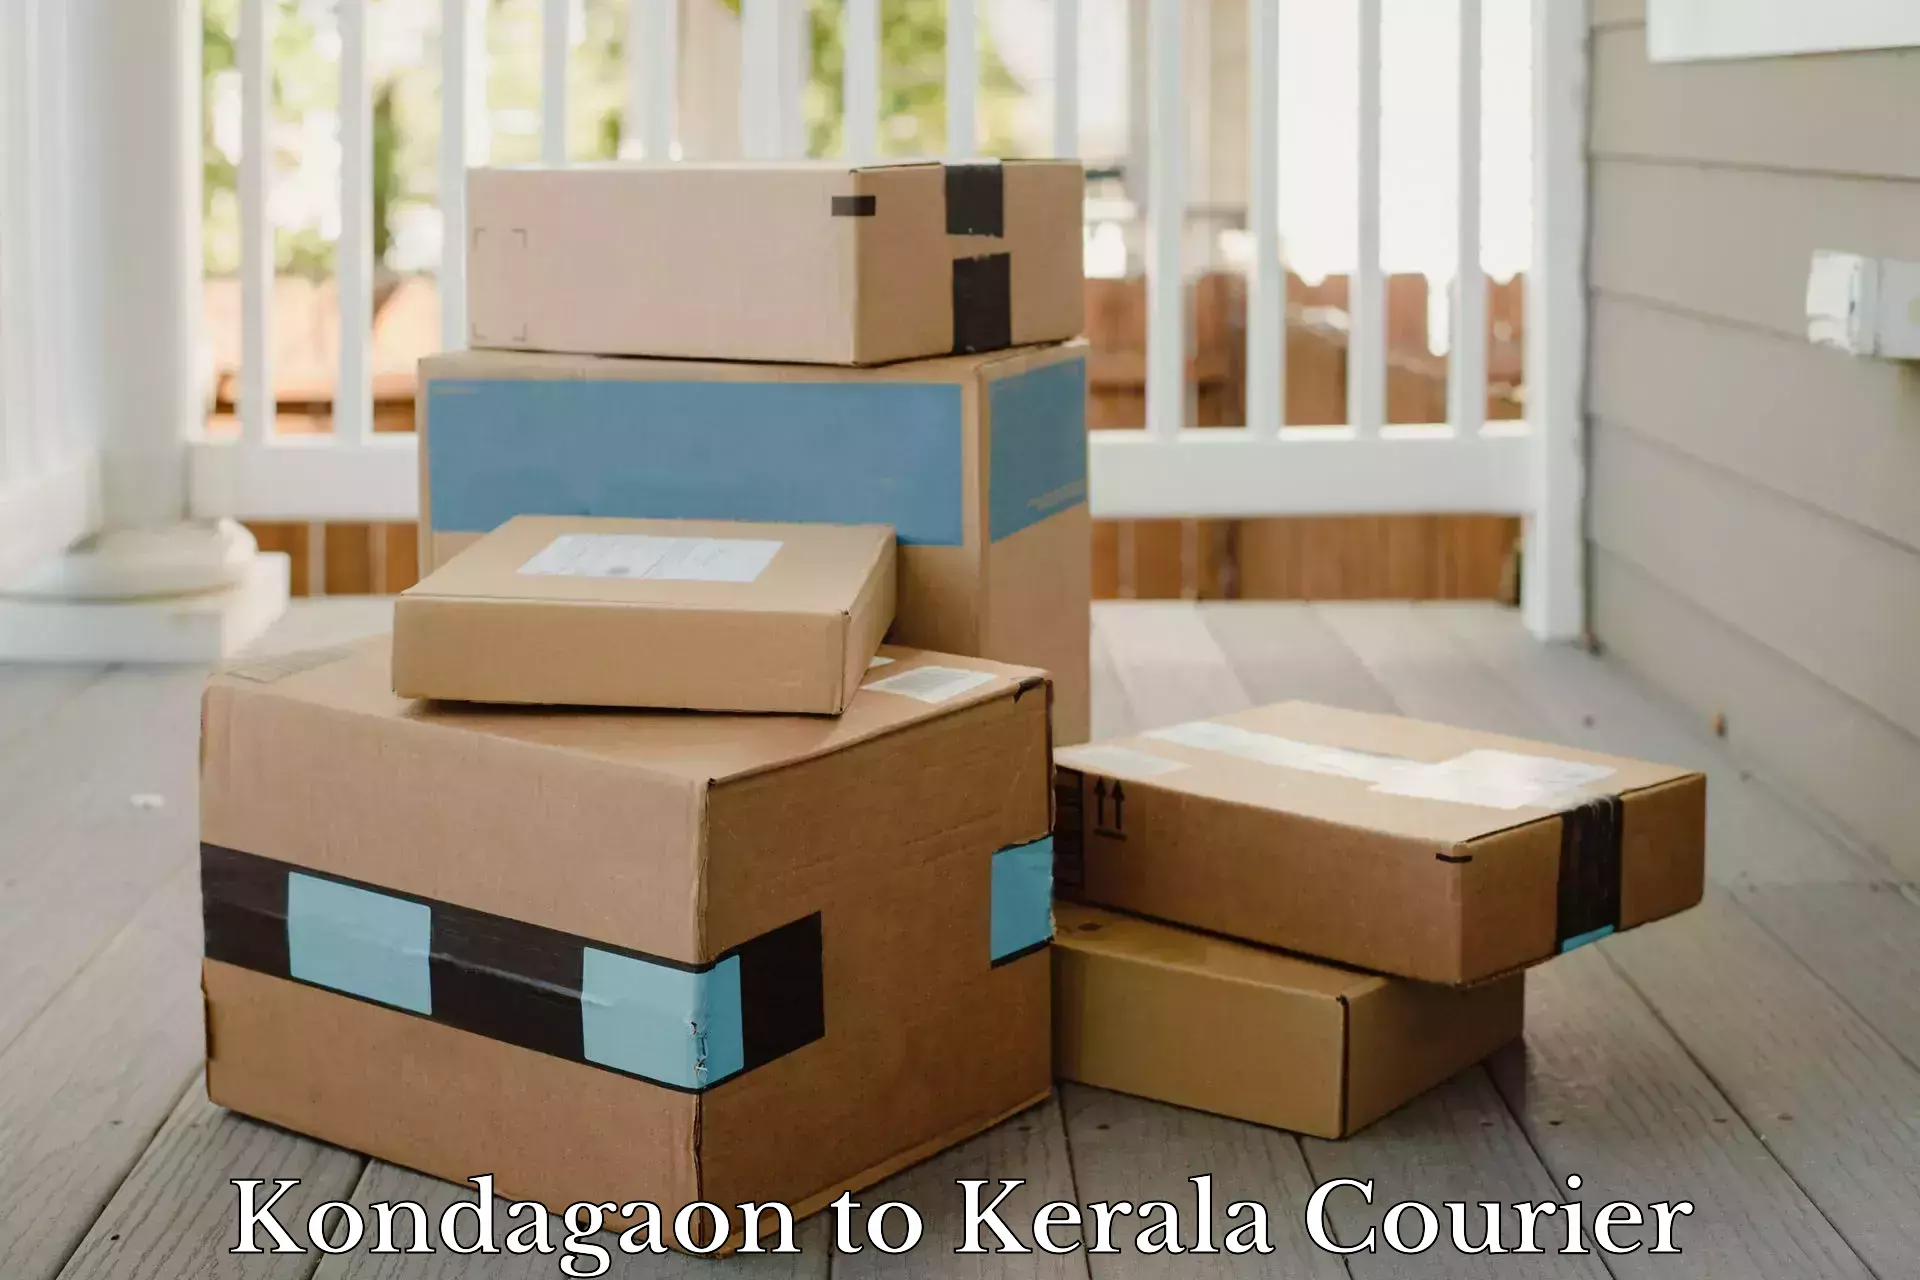 Seamless shipping experience in Kondagaon to Wayanad